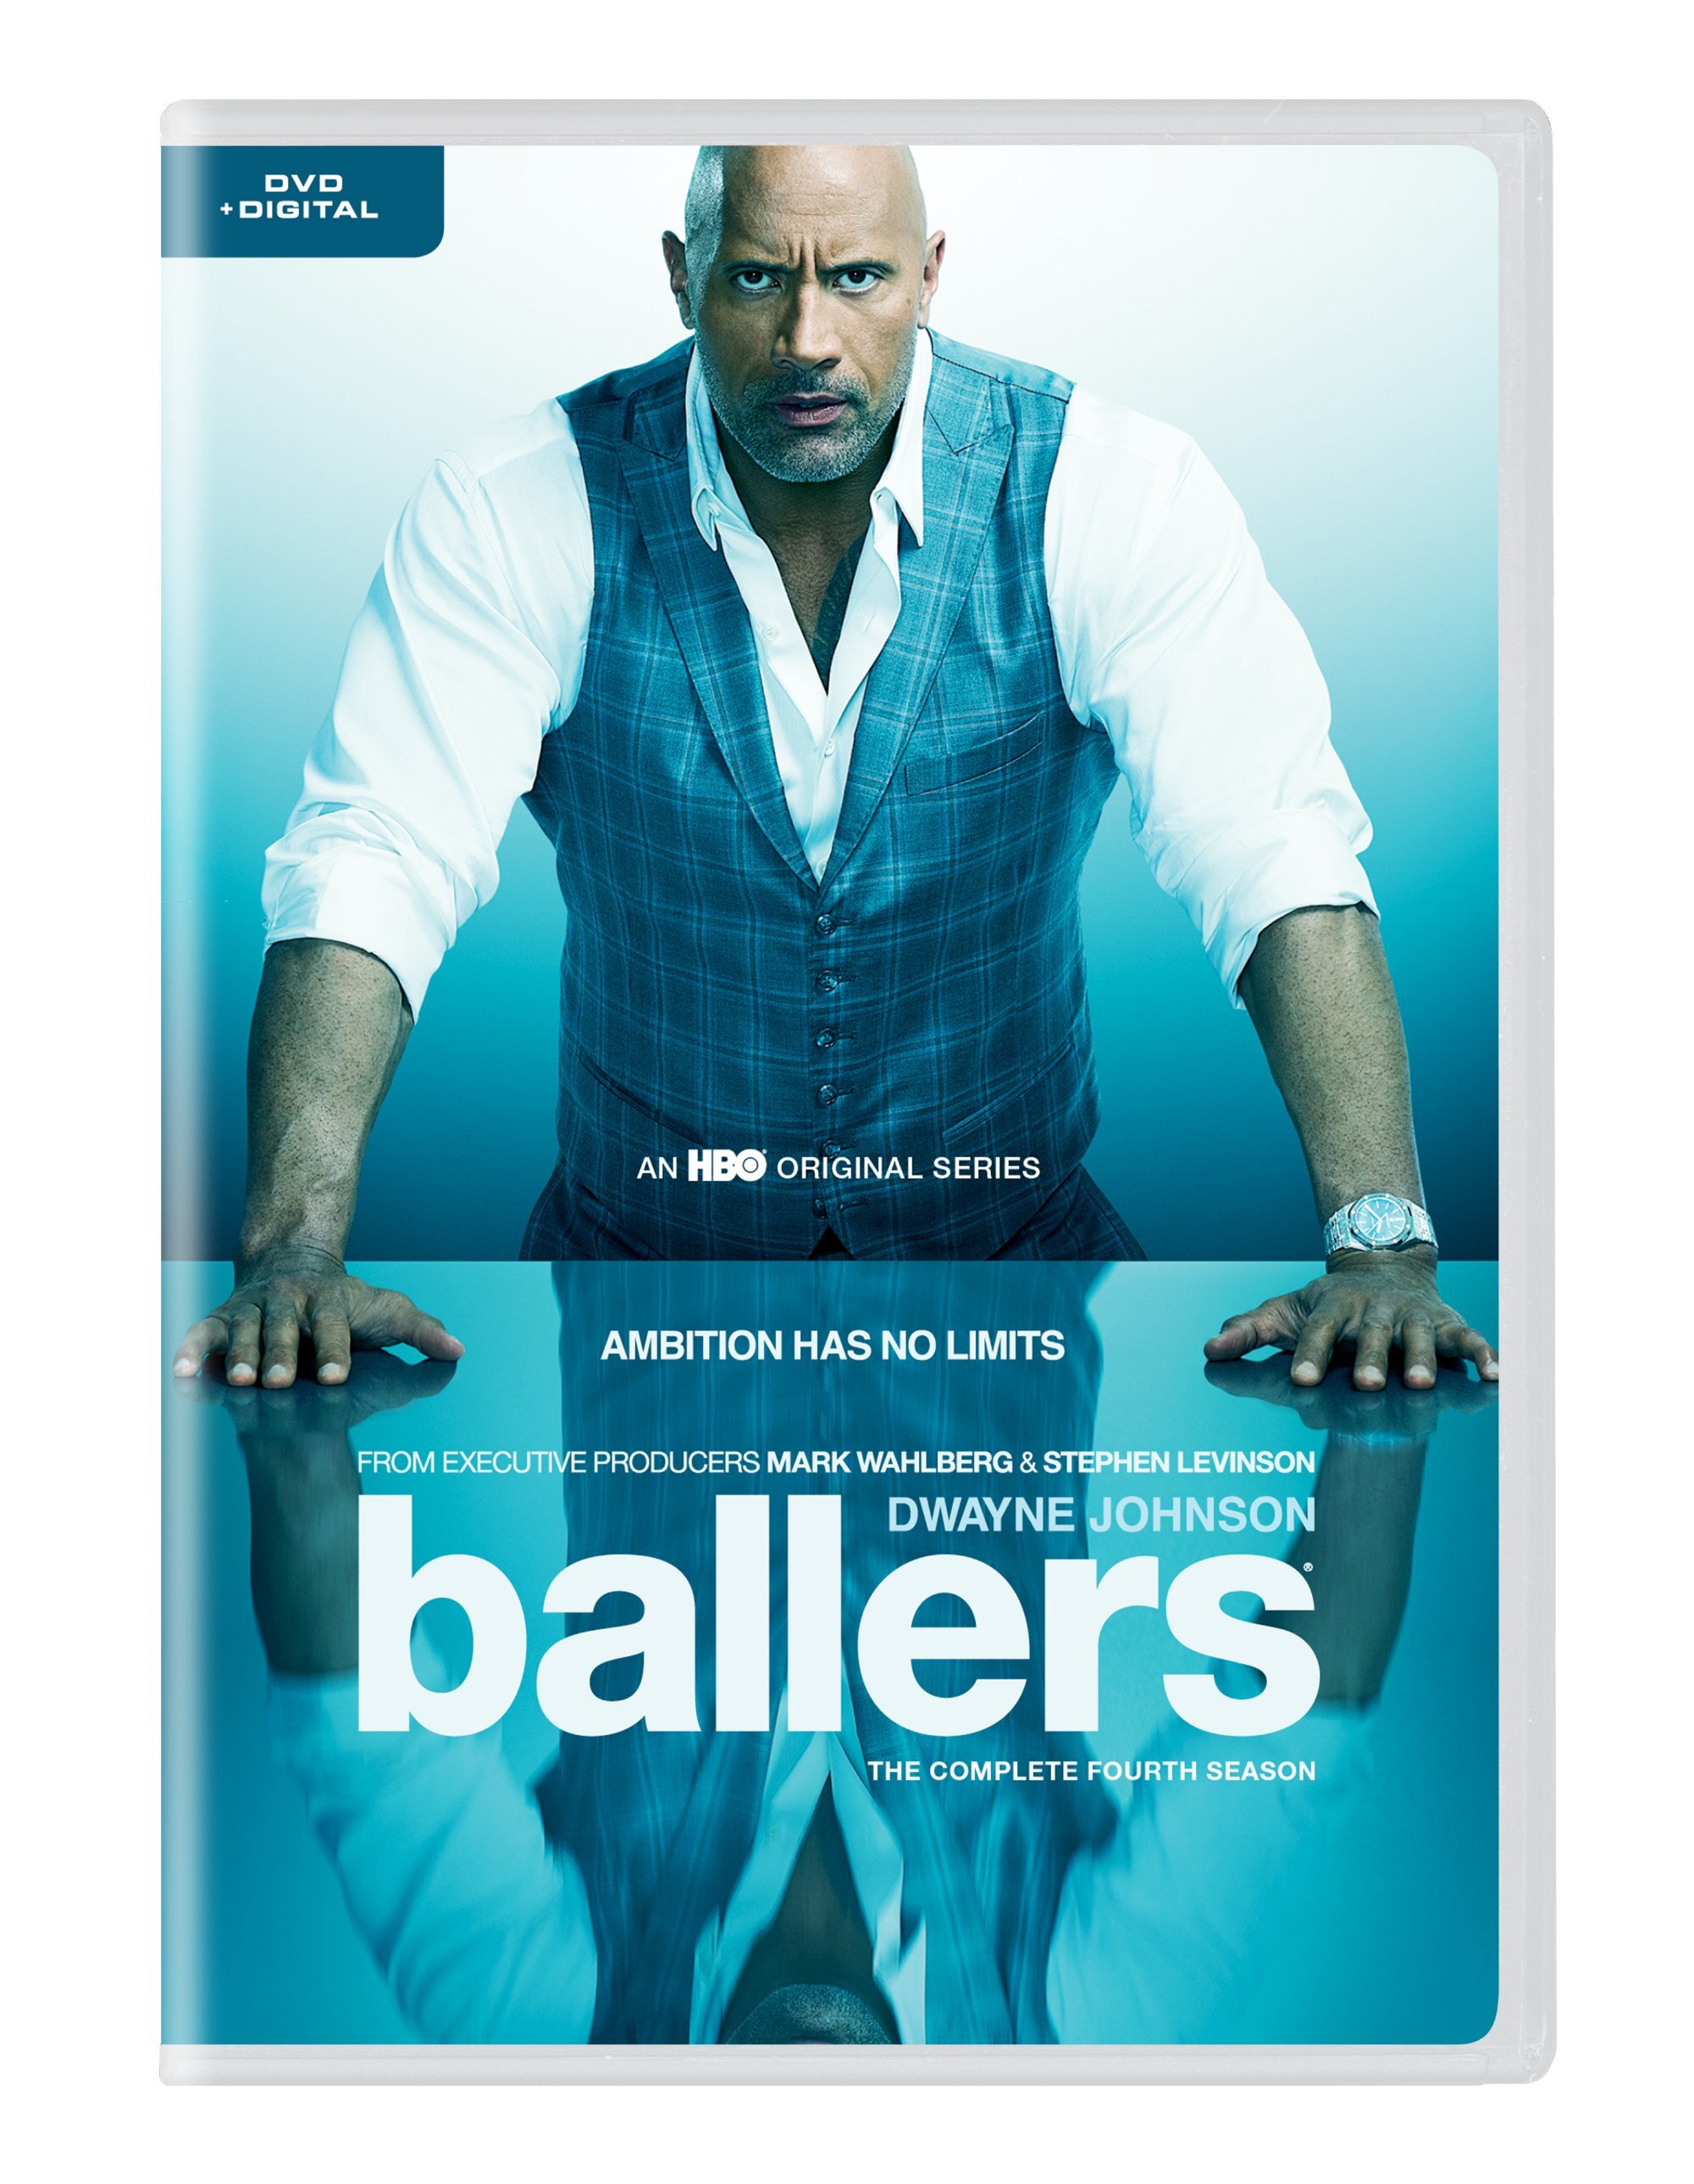 Ballers: The Complete Fourth Season (DVD + Digital Copy) - DVD [ 2018 ]  - Comedy Television On DVD - TV Shows On GRUV